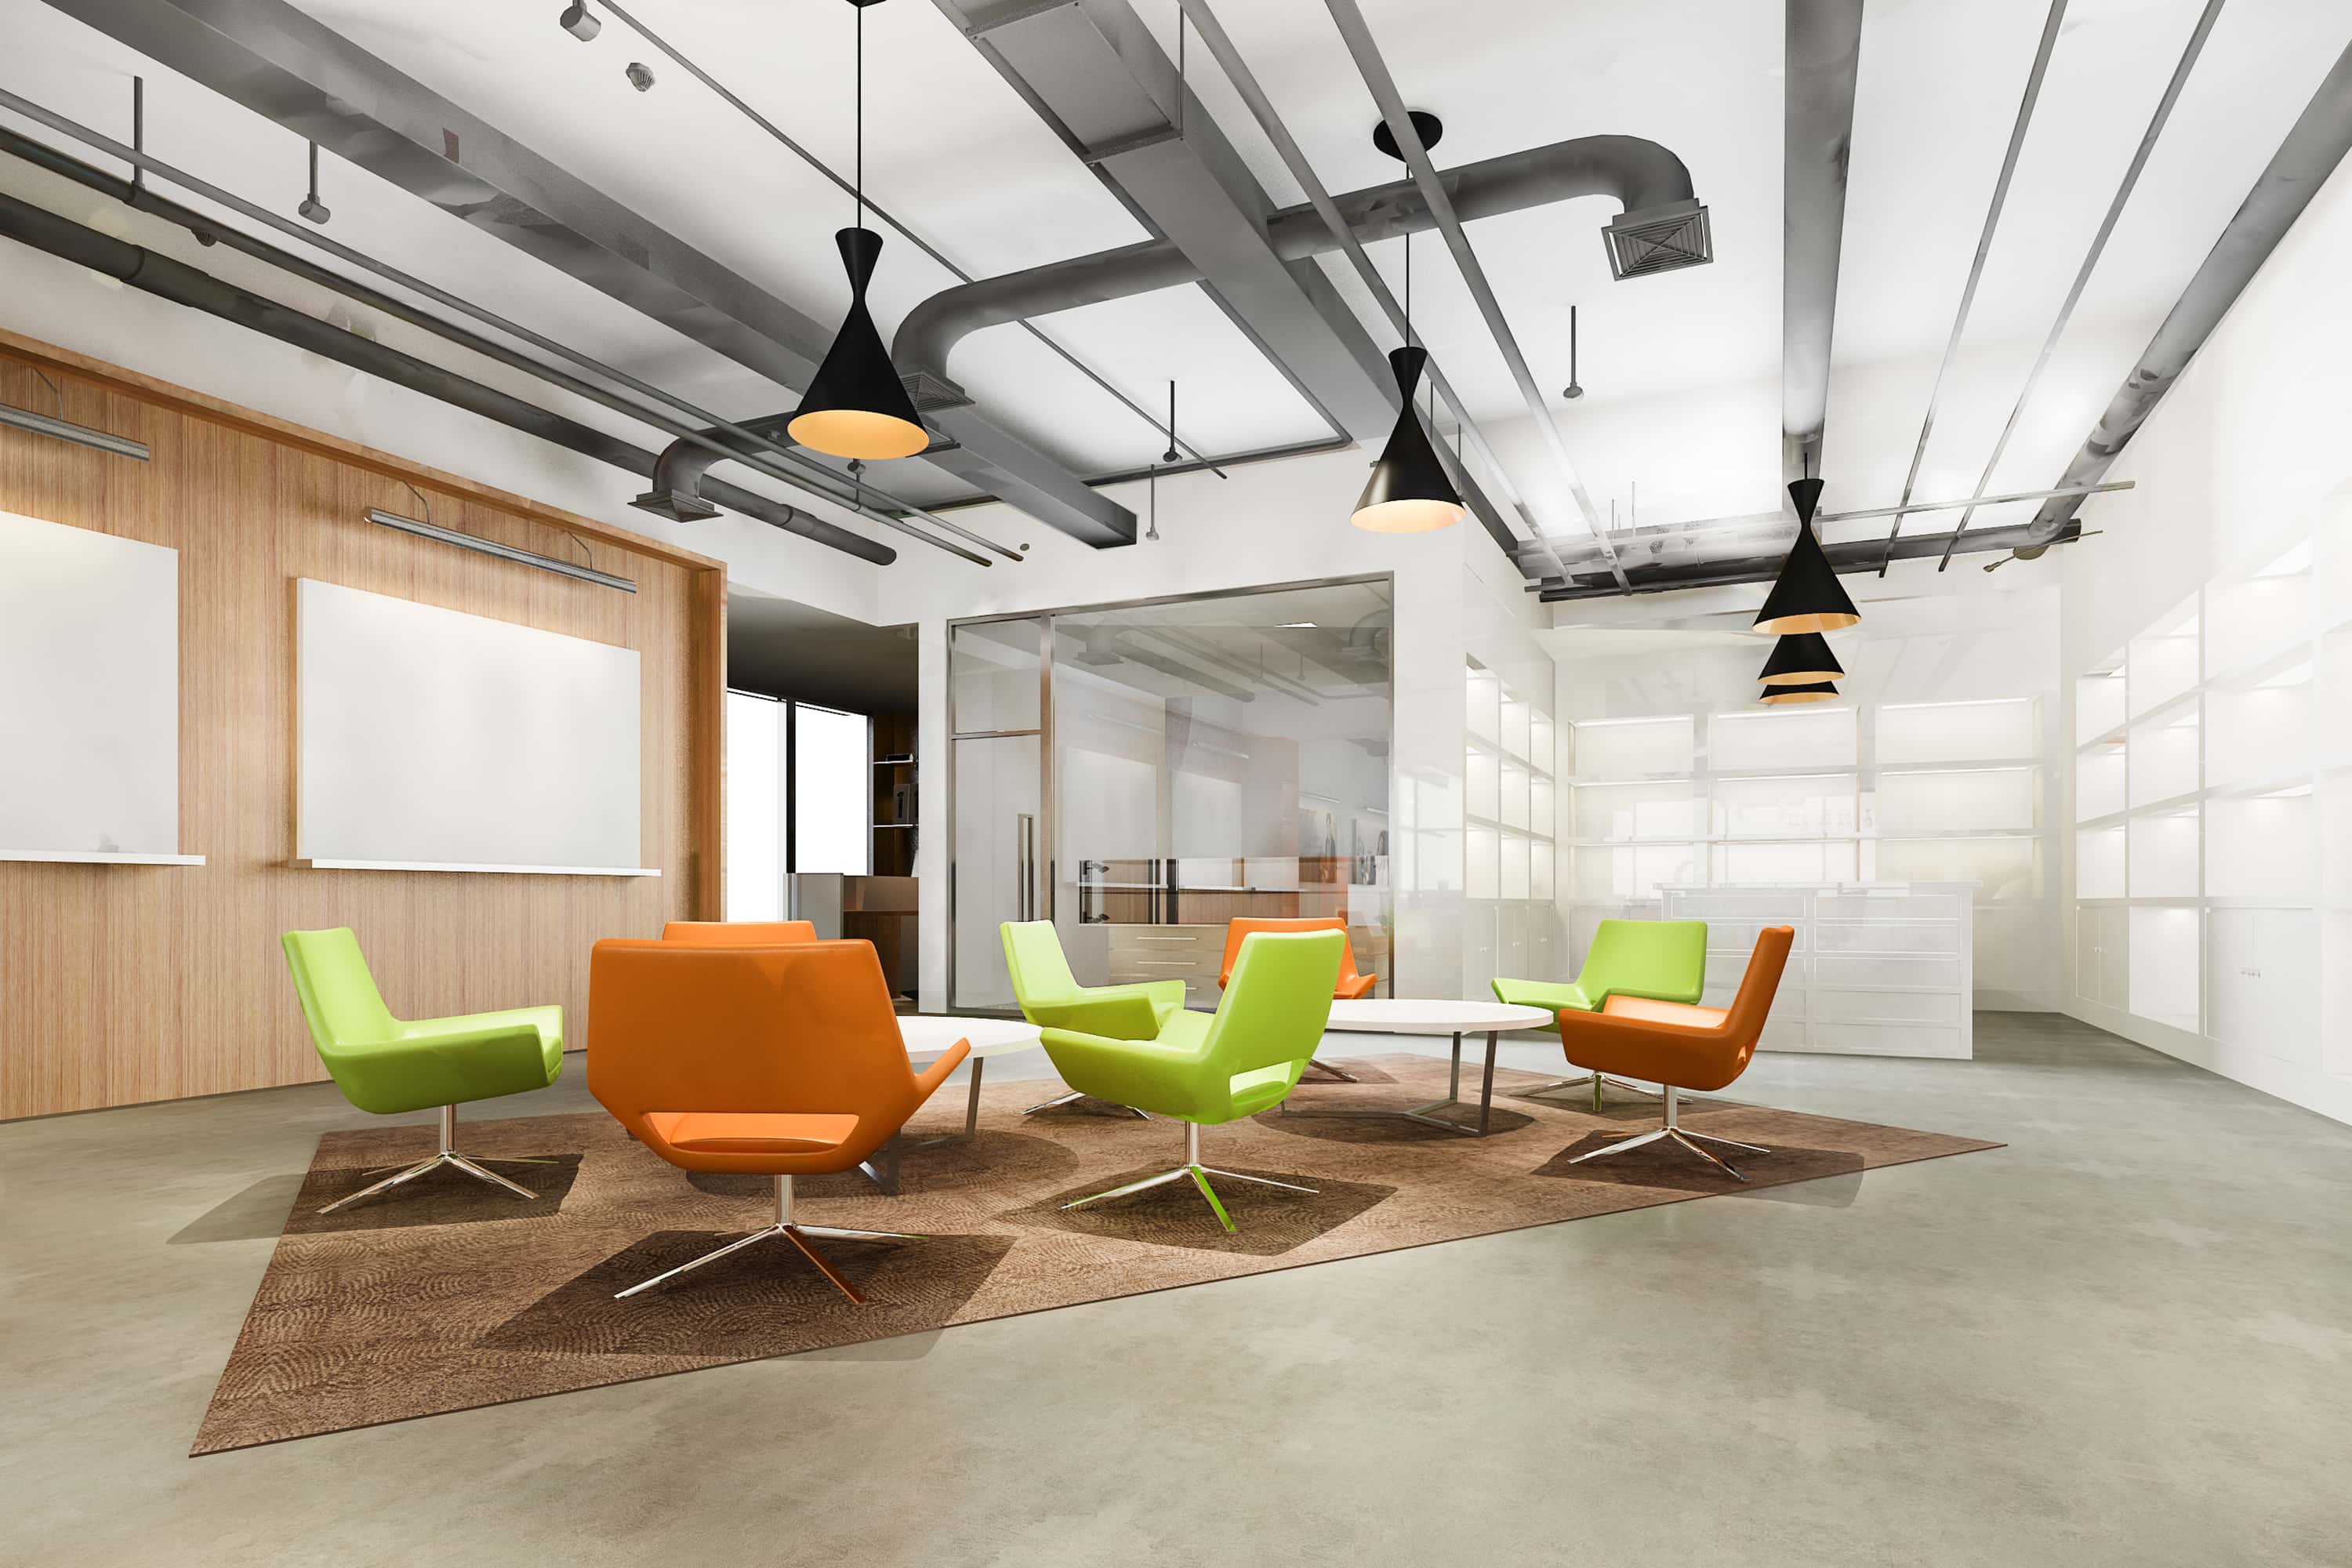 How to Incorporate Fall Ceiling into Your Office Interior Design